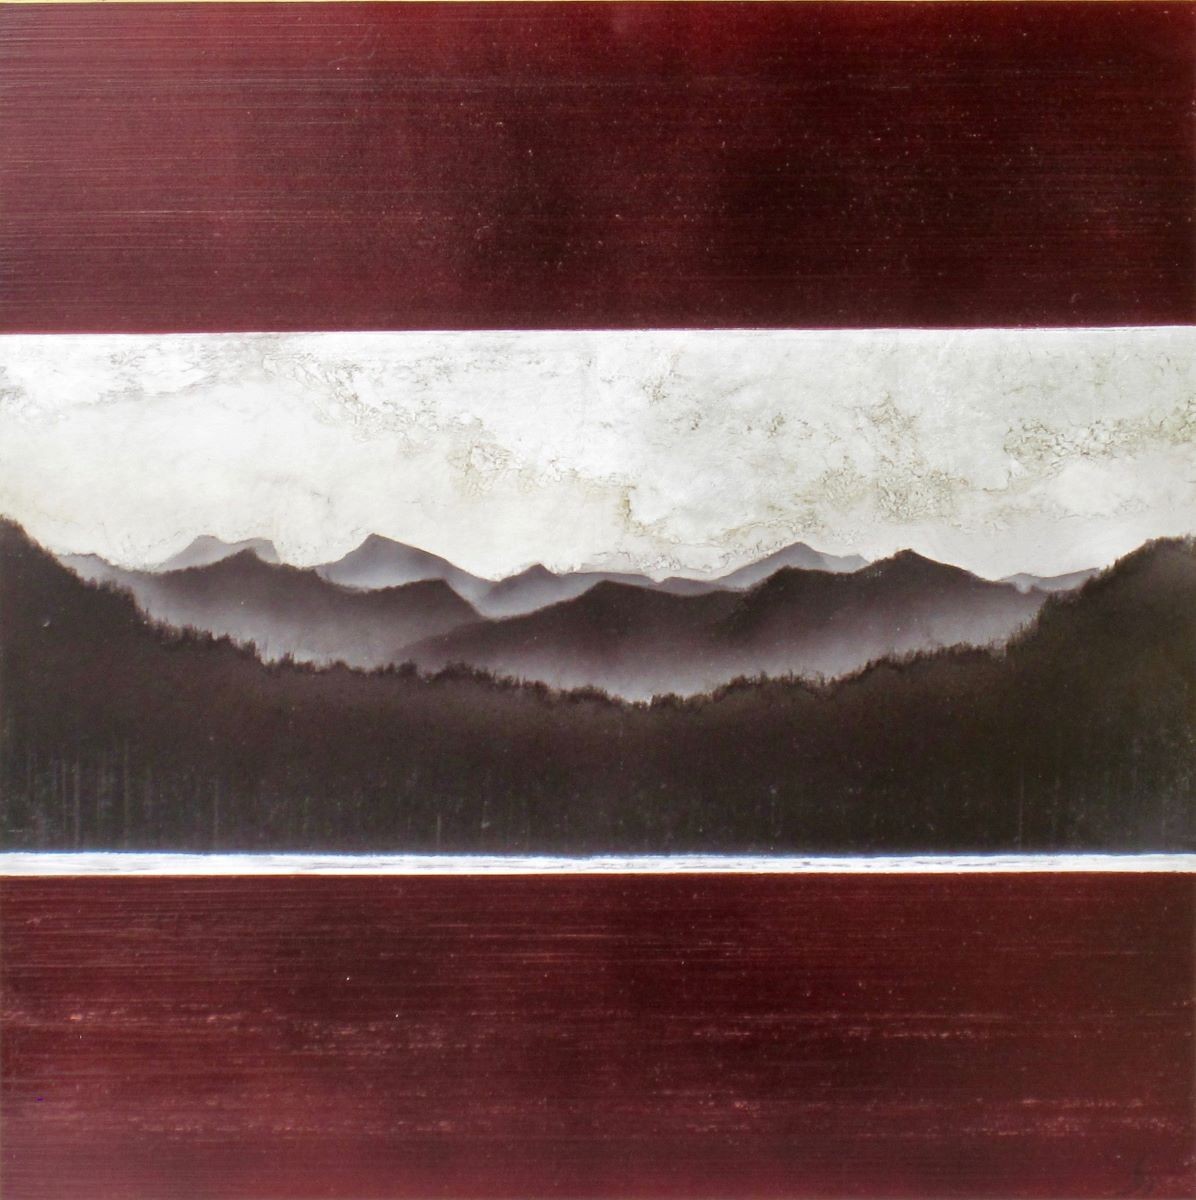 Landscape art. Title: Mountain Lake, Mixed Media, 21.5 x 21.5 in by Canadian artist David Graff.